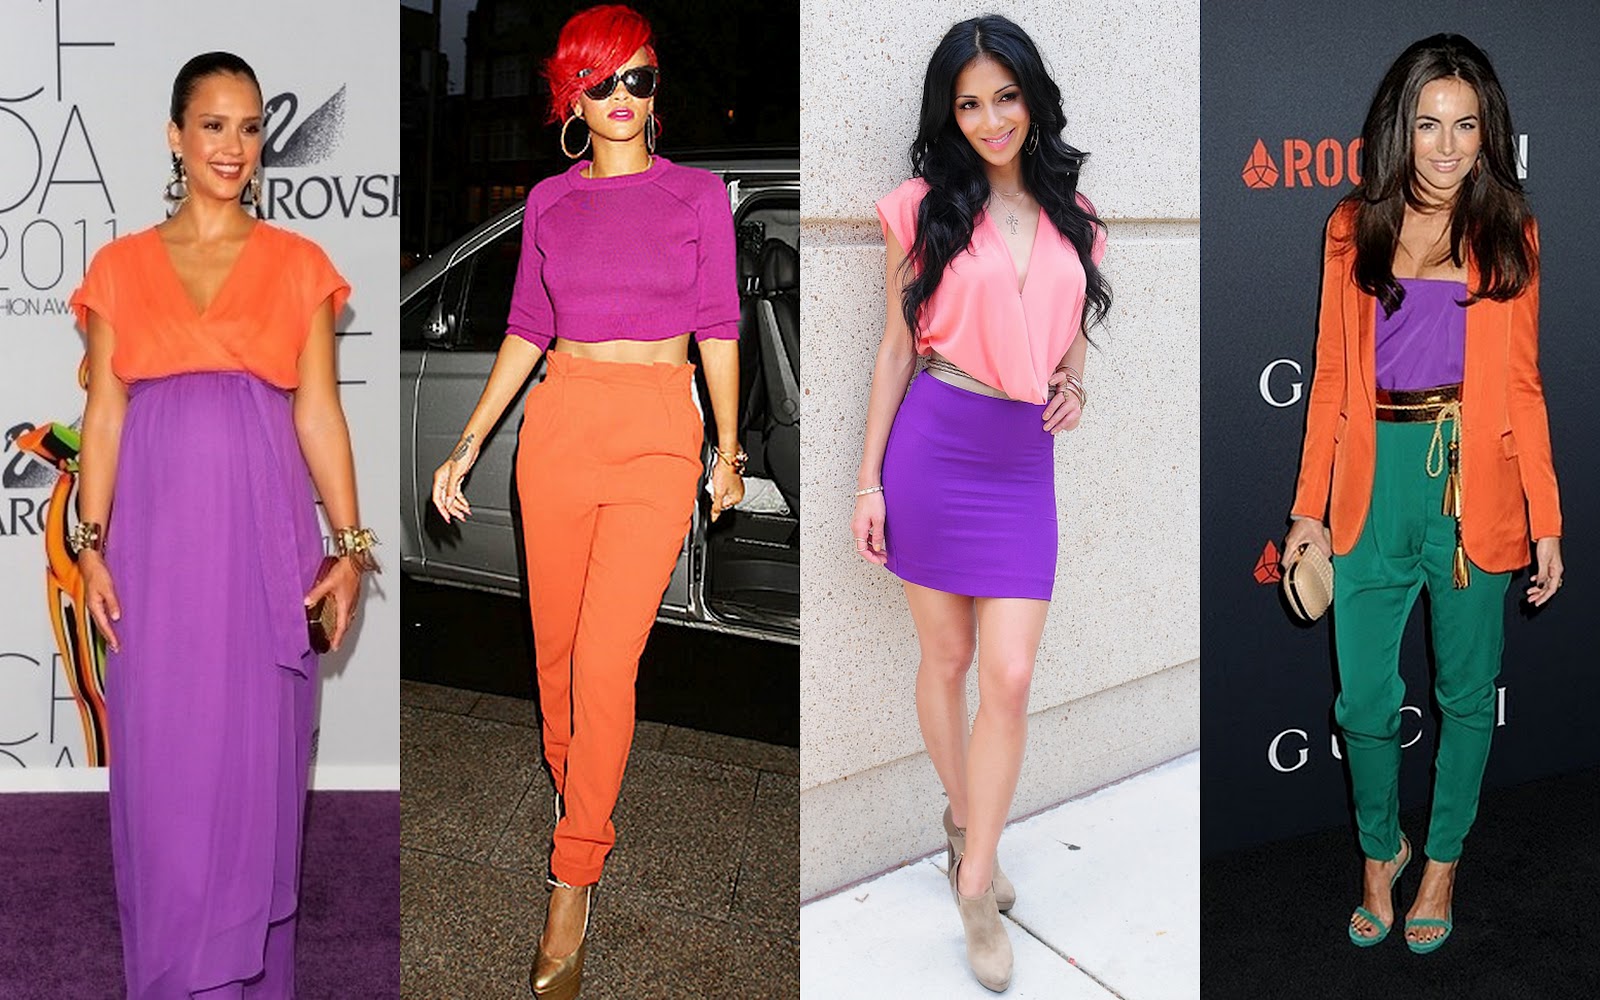 Some of the famous celebrities , can be seen dressed up in bright hues